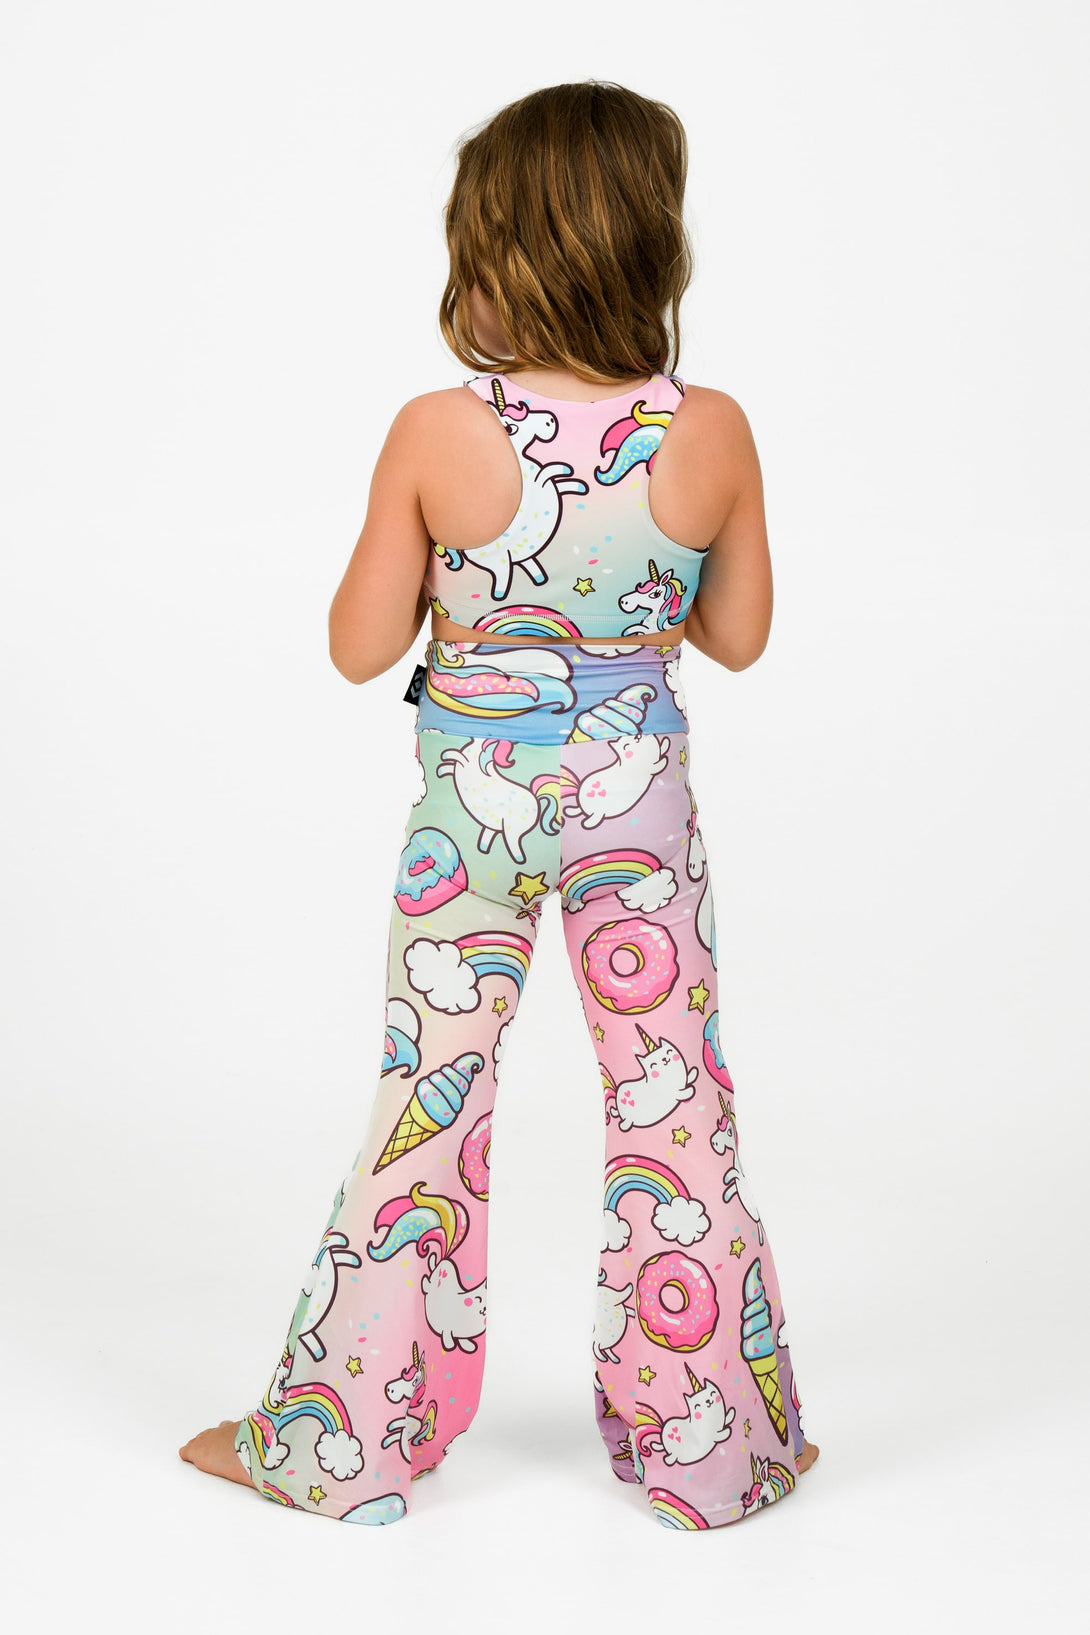 Young girl wearing activewear and loungewear from exotica athletica in a unicorn print bell leg pants